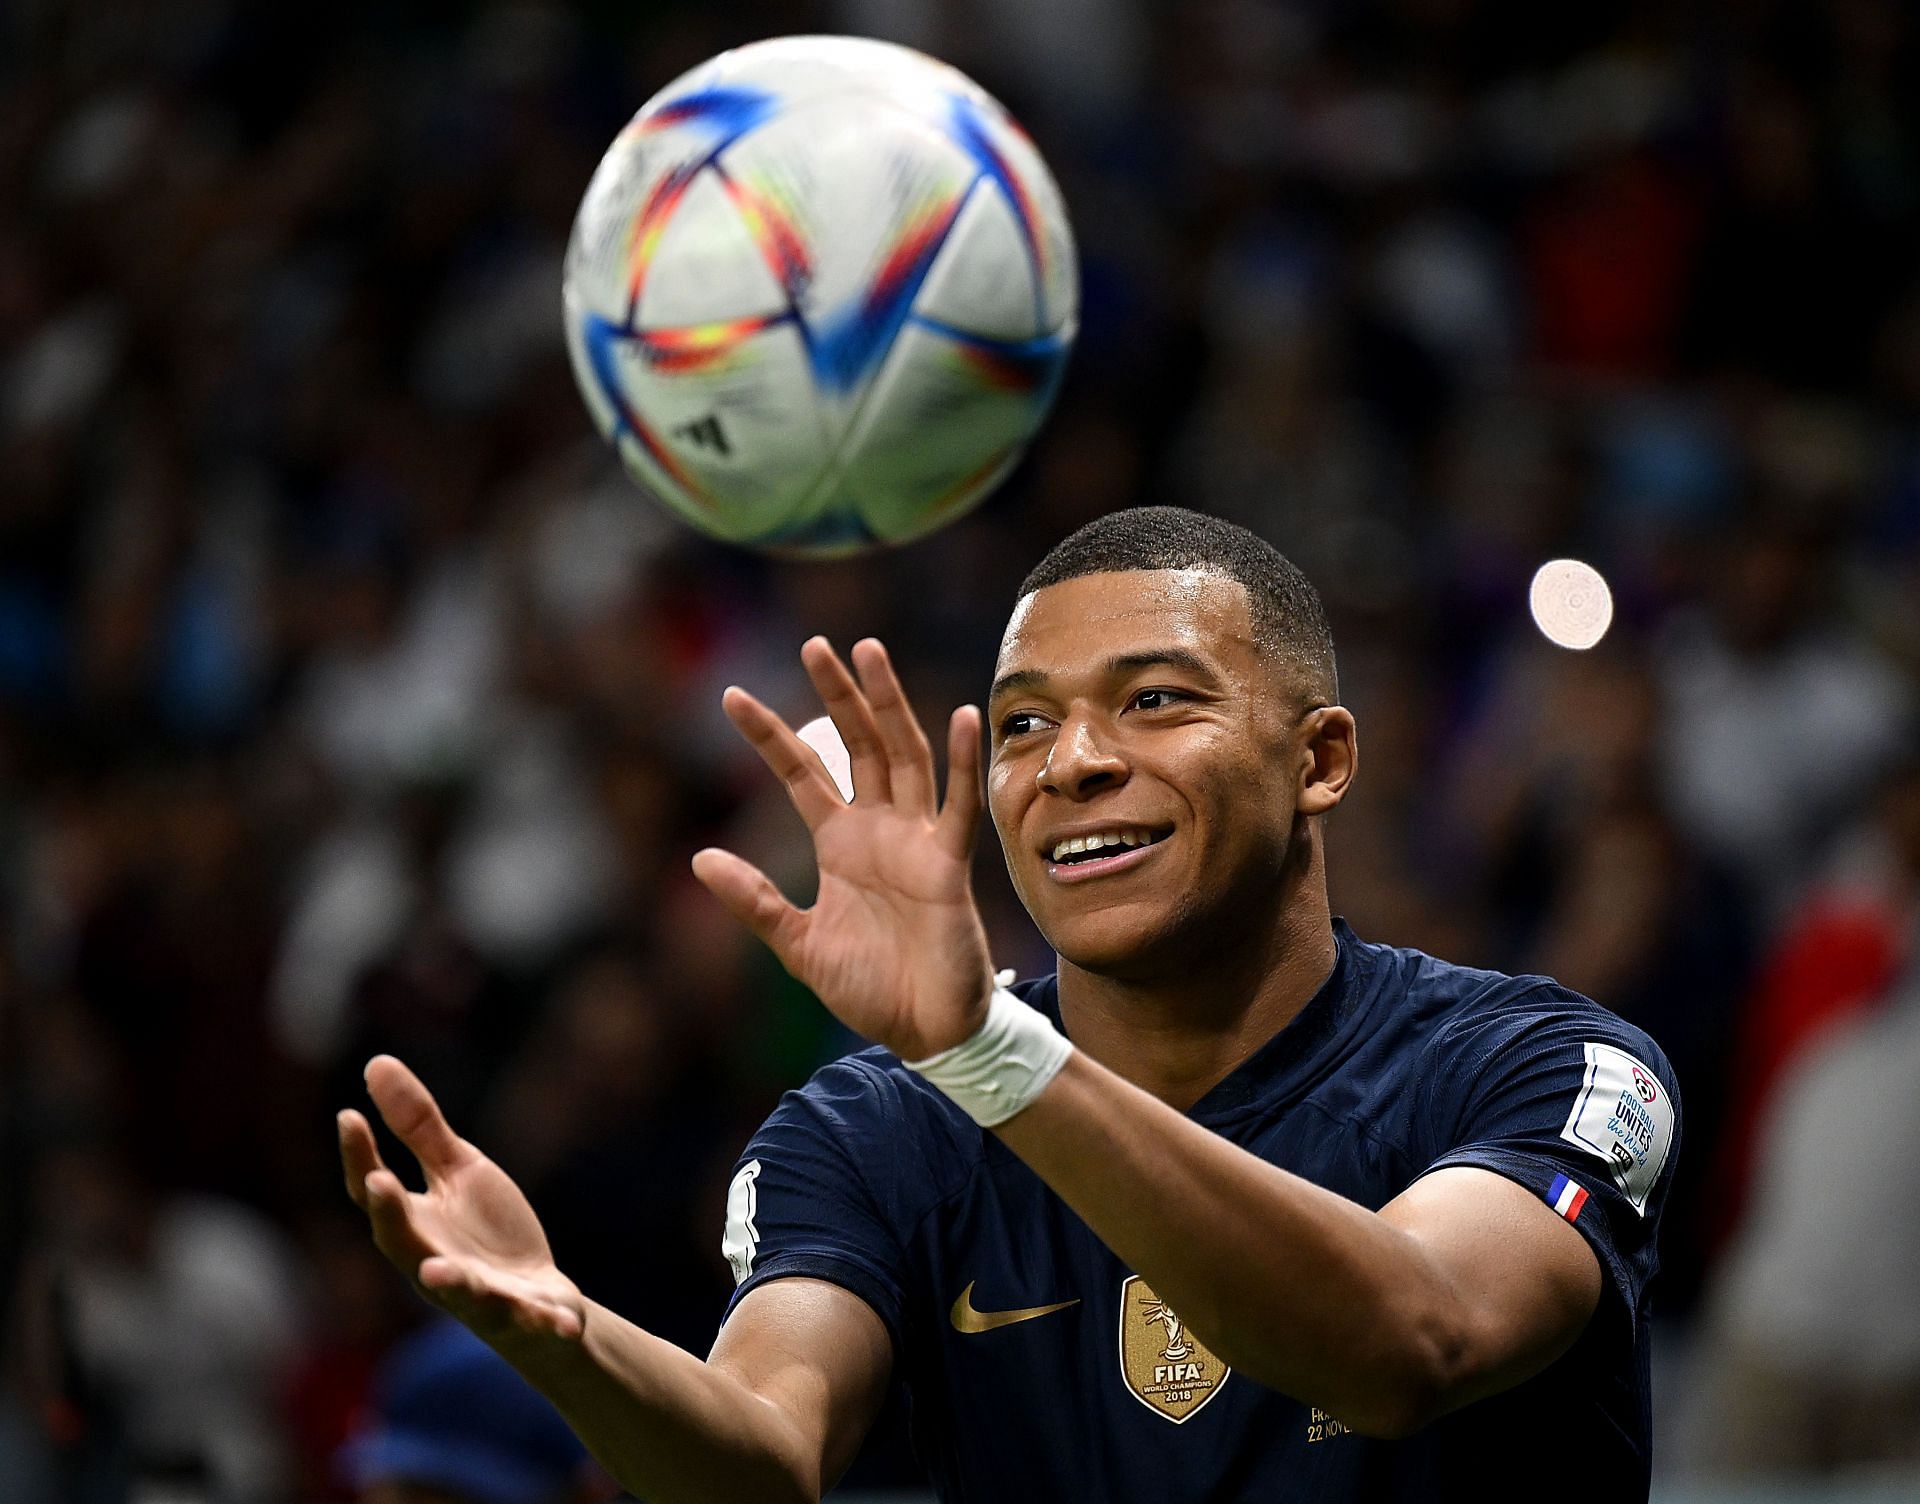 A fantastic opening night for Mbappe and co